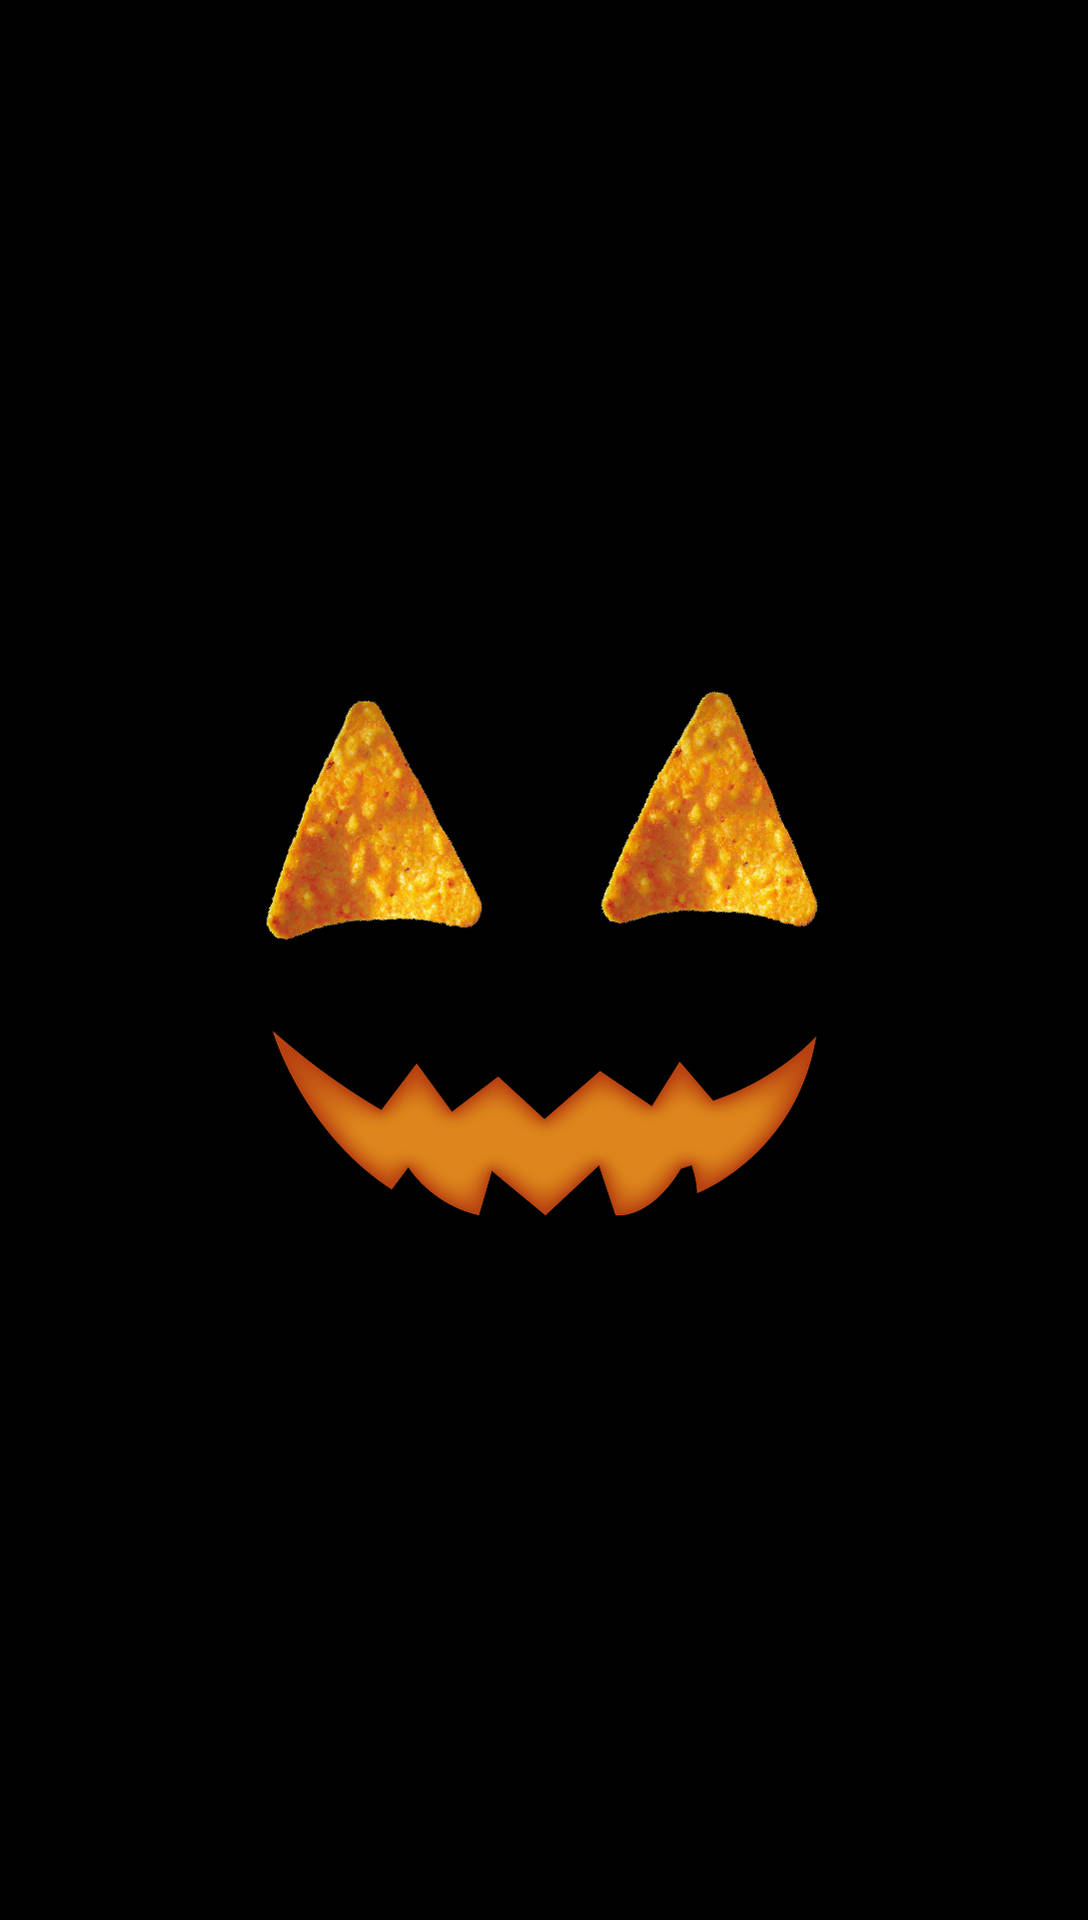 "Show Off Your Spooky Side with the Cute Halloween Phone" Wallpaper